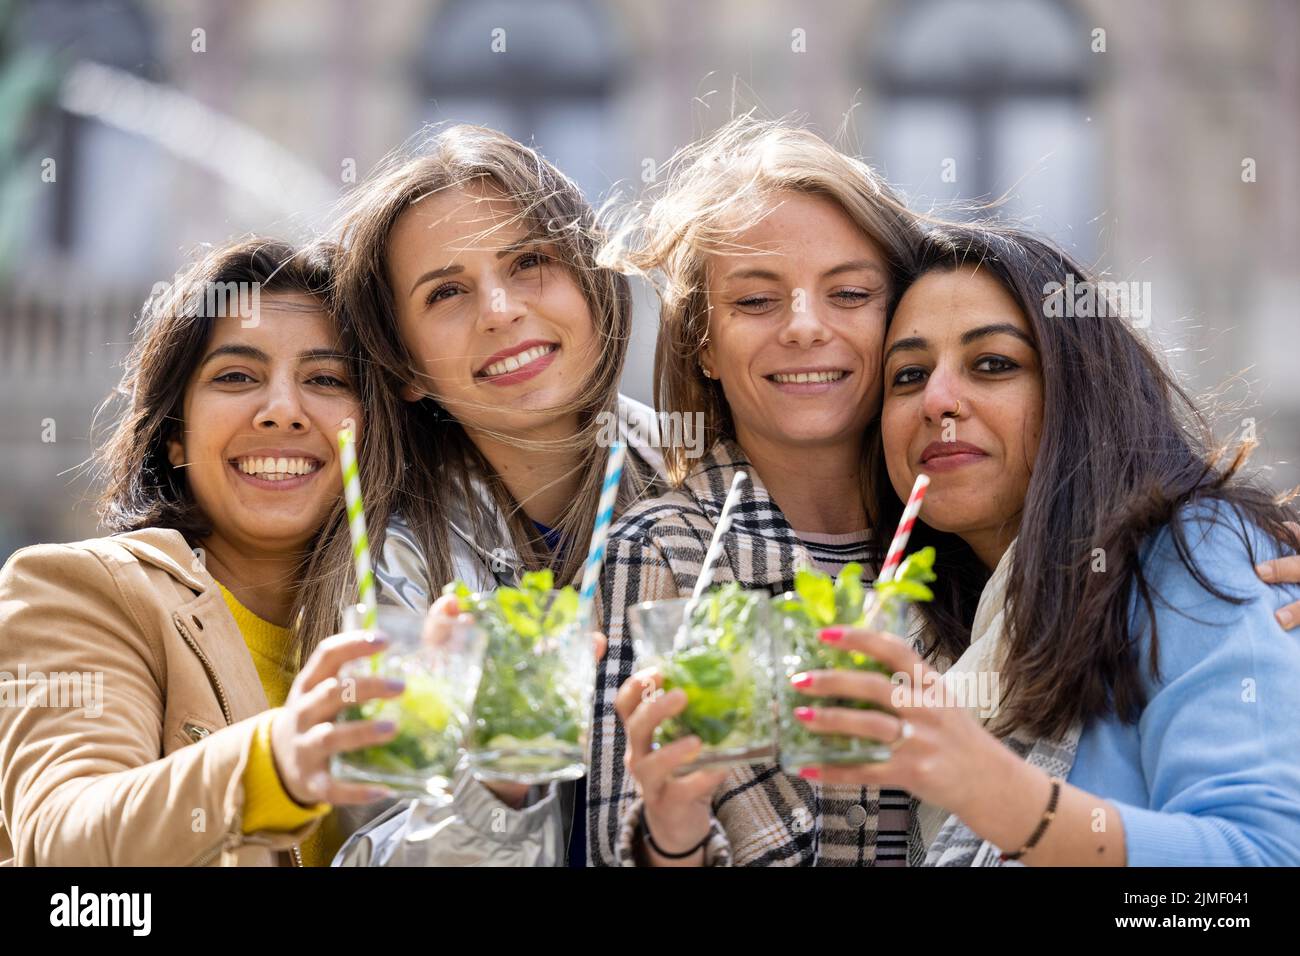 Muti ethnic group of female friends having fun drinking cocktails outdoor in the city in bar restaurant Stock Photo